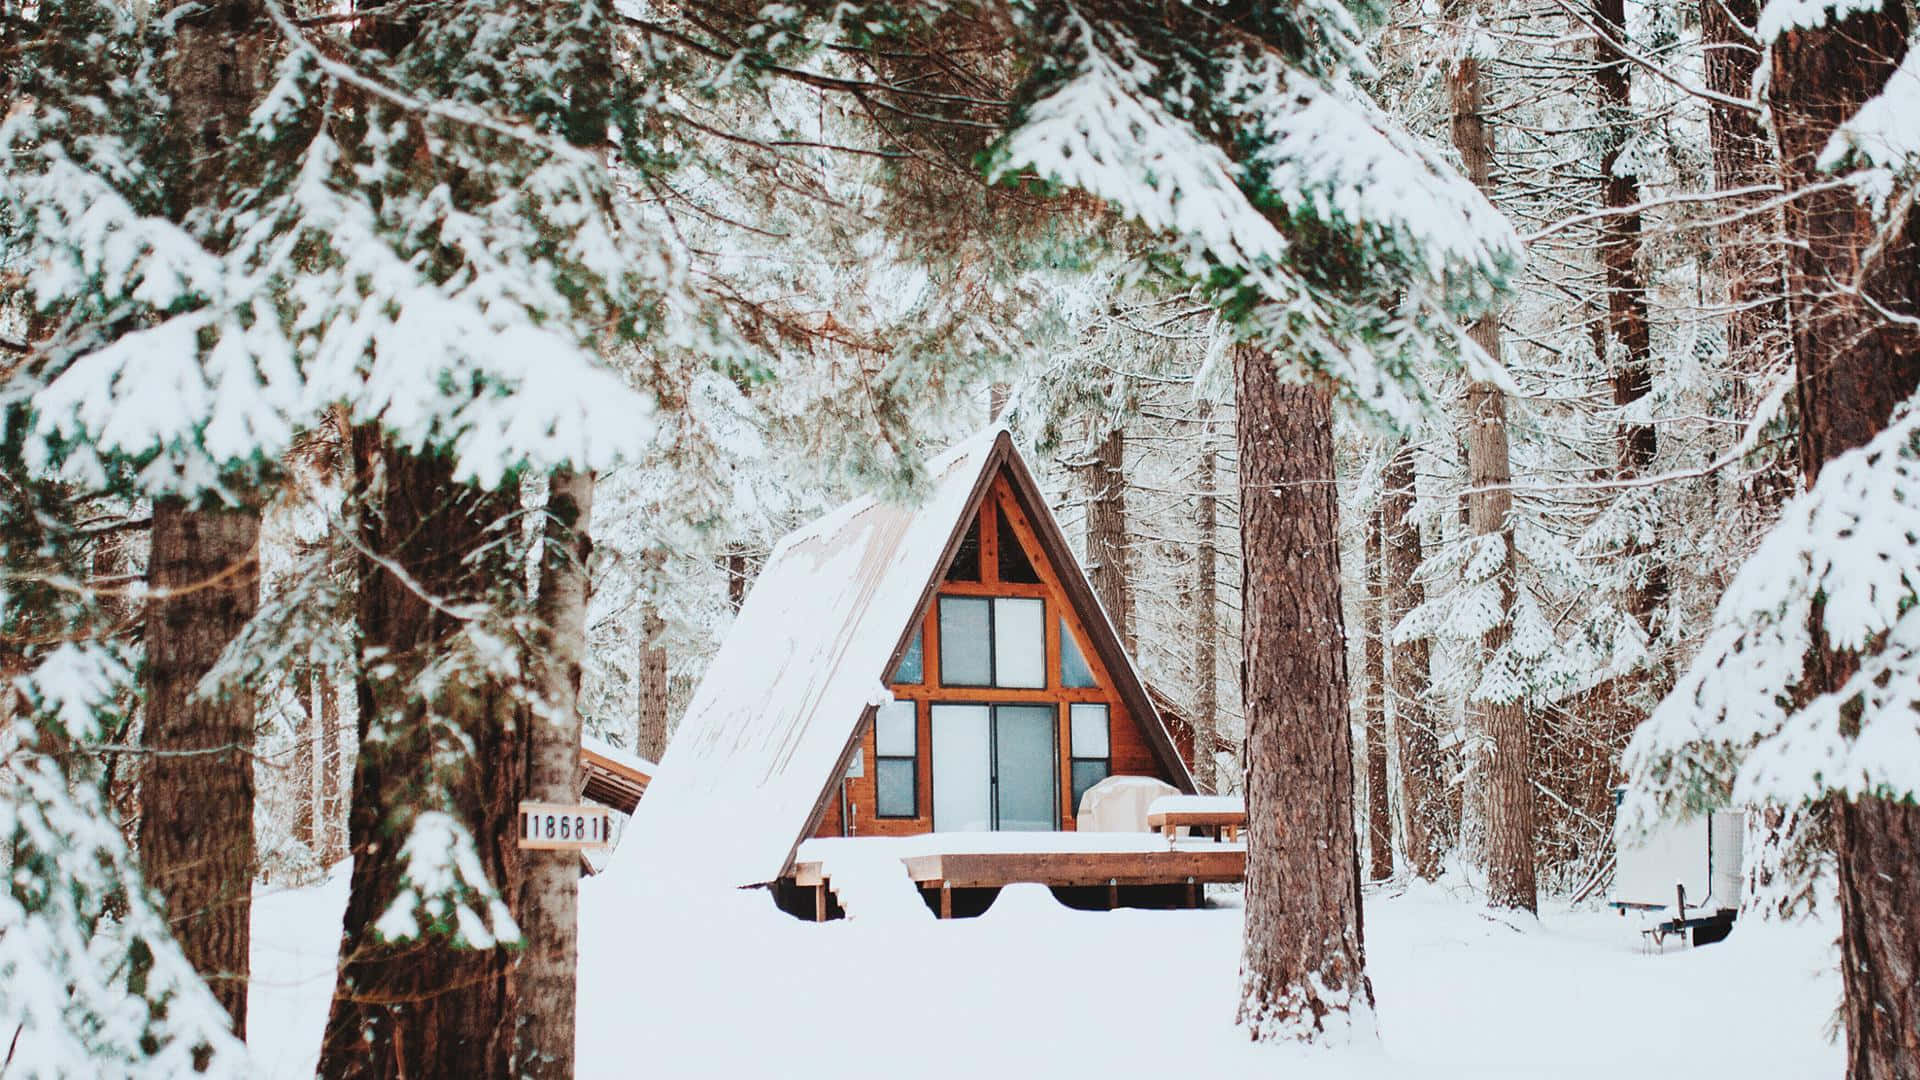 A Cozy Winter Cabin Nestled in the Snow Wallpaper